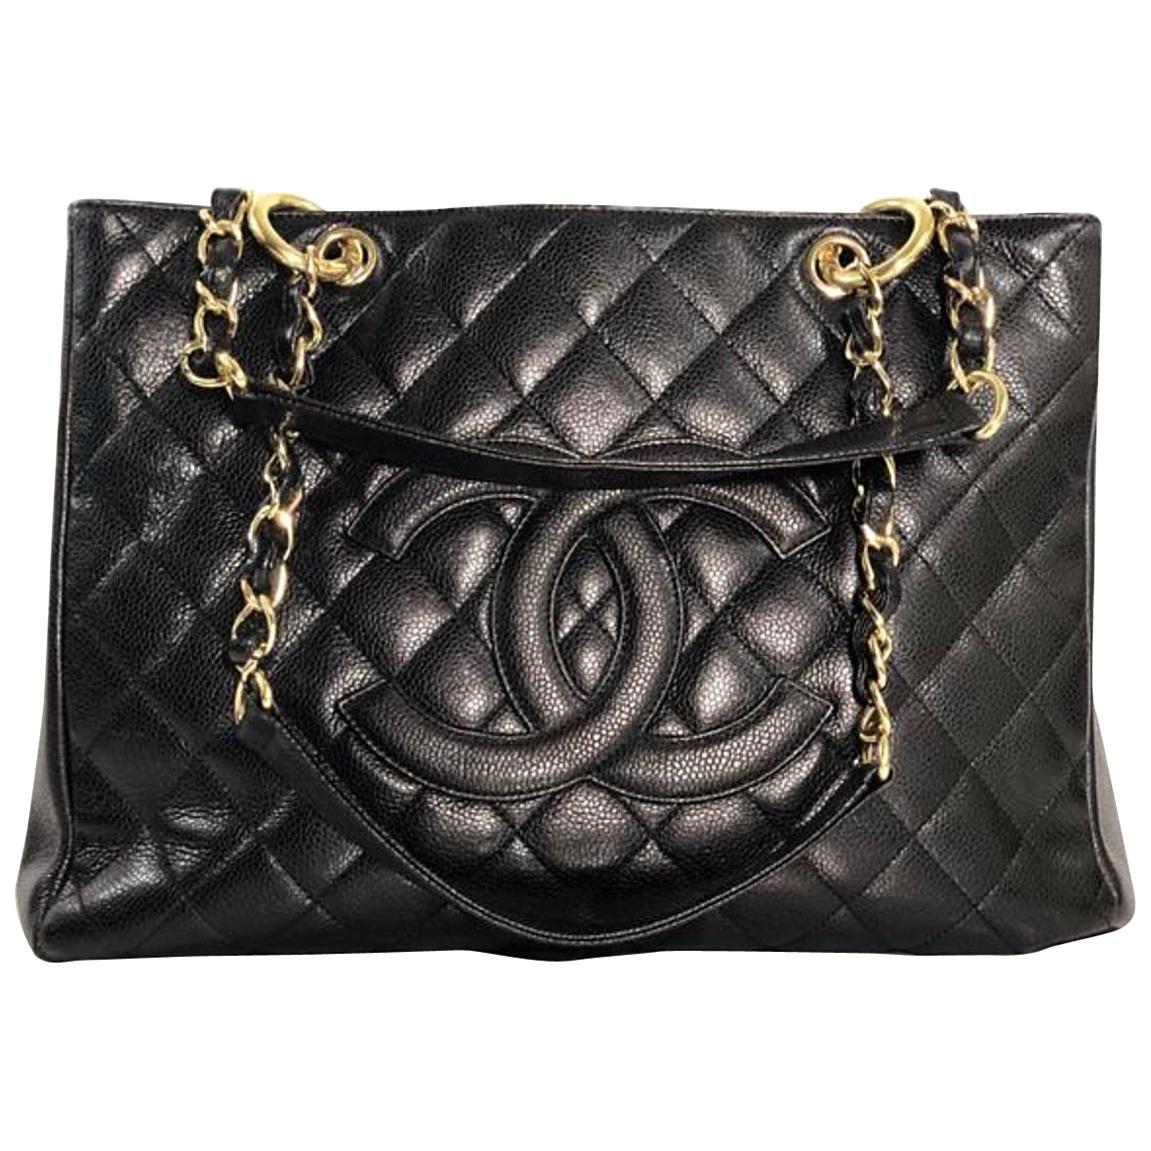 Chanel Caviar Leather Grand Shopping Tote w Gold Hardware in Black Shoulder Bag For Sale